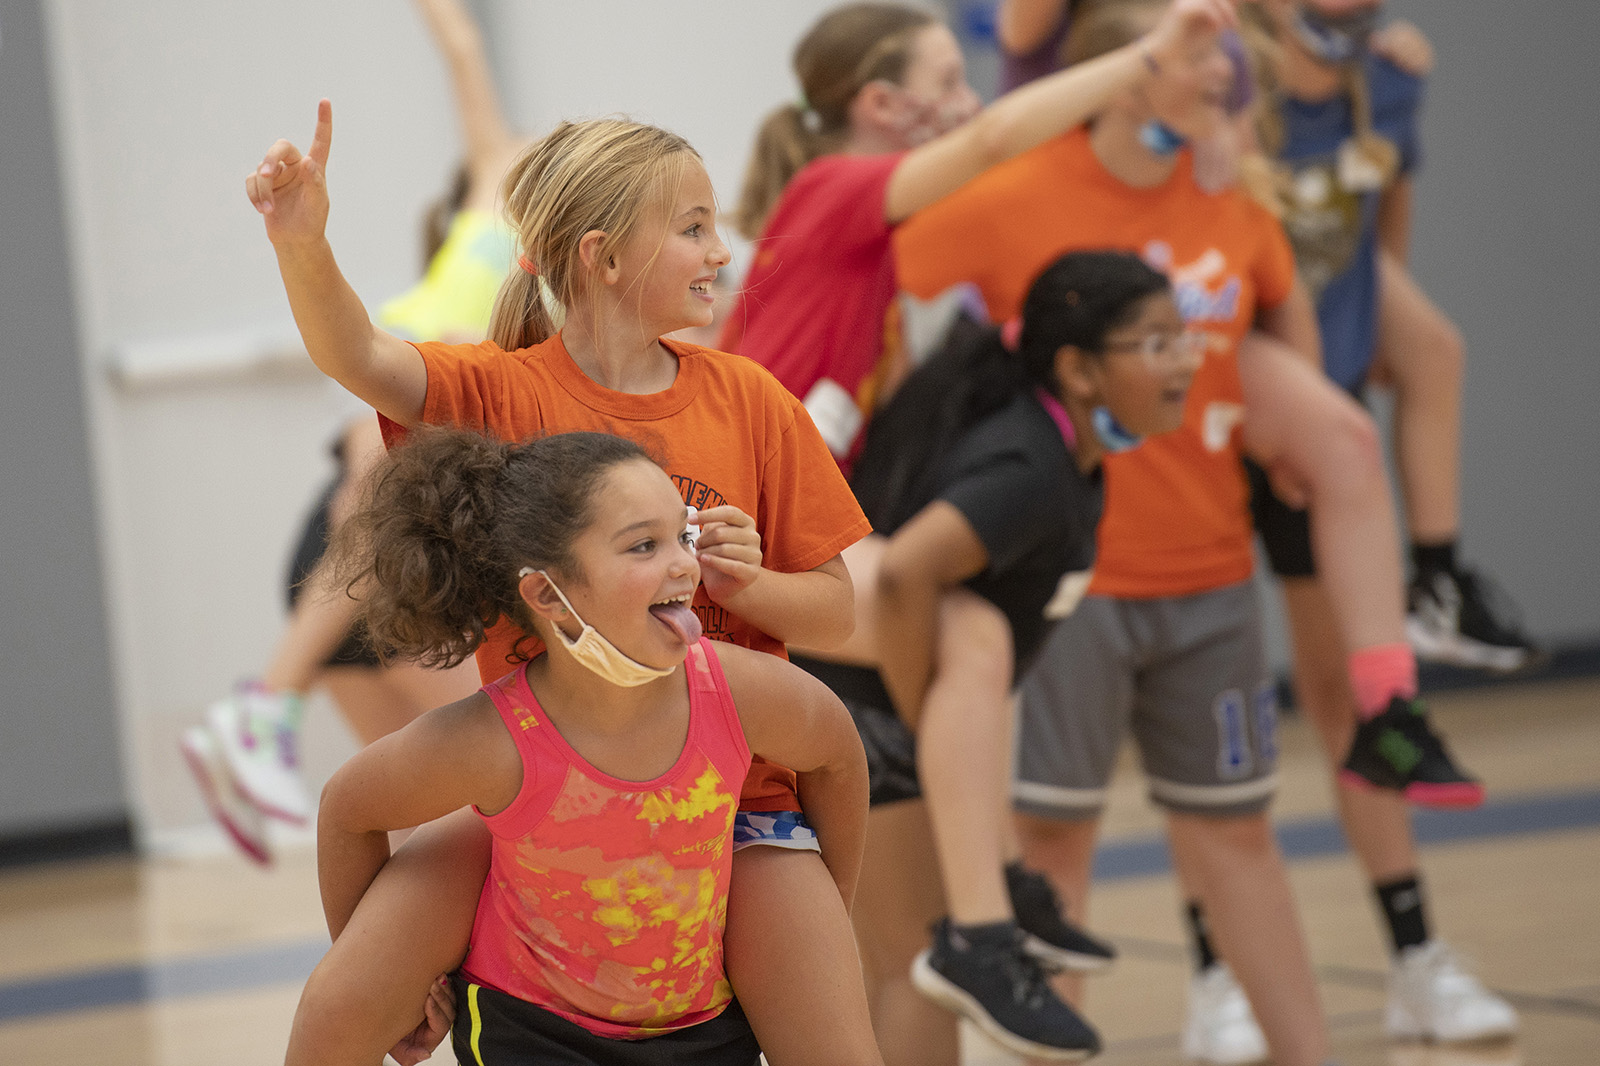 Girls play in the gym during a youth basketball camp.